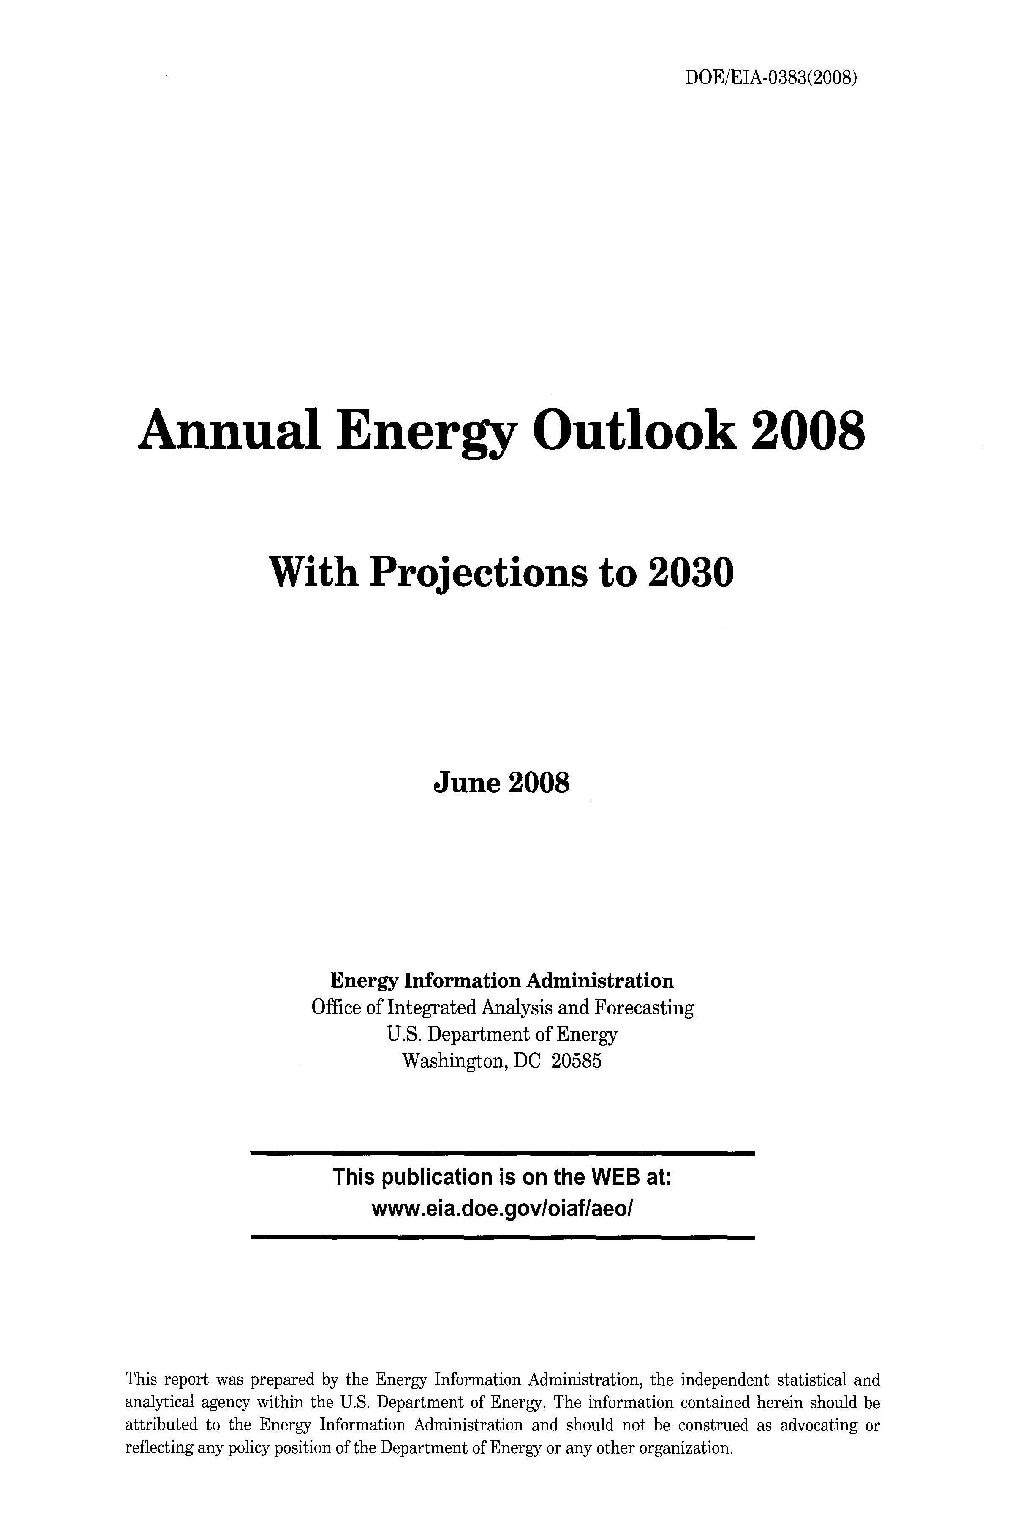 handle is hein.usfed/annen2008 and id is 1 raw text is: DOE/EIA-0383(2008)

Annual Energy Outlook 2008
With Projections to 2030
June 2008
Energy Information Administration
Office of Integrated Analysis and Forecasting
U.S. Department of Energy
Washington, DC 20585

This publication is on the WEB at:
www.eia.doe.gov/oiaf/aeo/

This report was prepared by the Energy Information Administration, the independent statistical and
analytical agency within the U.S. Department of Energy. The information contained herein should be
attributed to the Energy Information Administration and should not be construed as advocating or
reflecting any policy position of the Department of Energy or any other organization.


